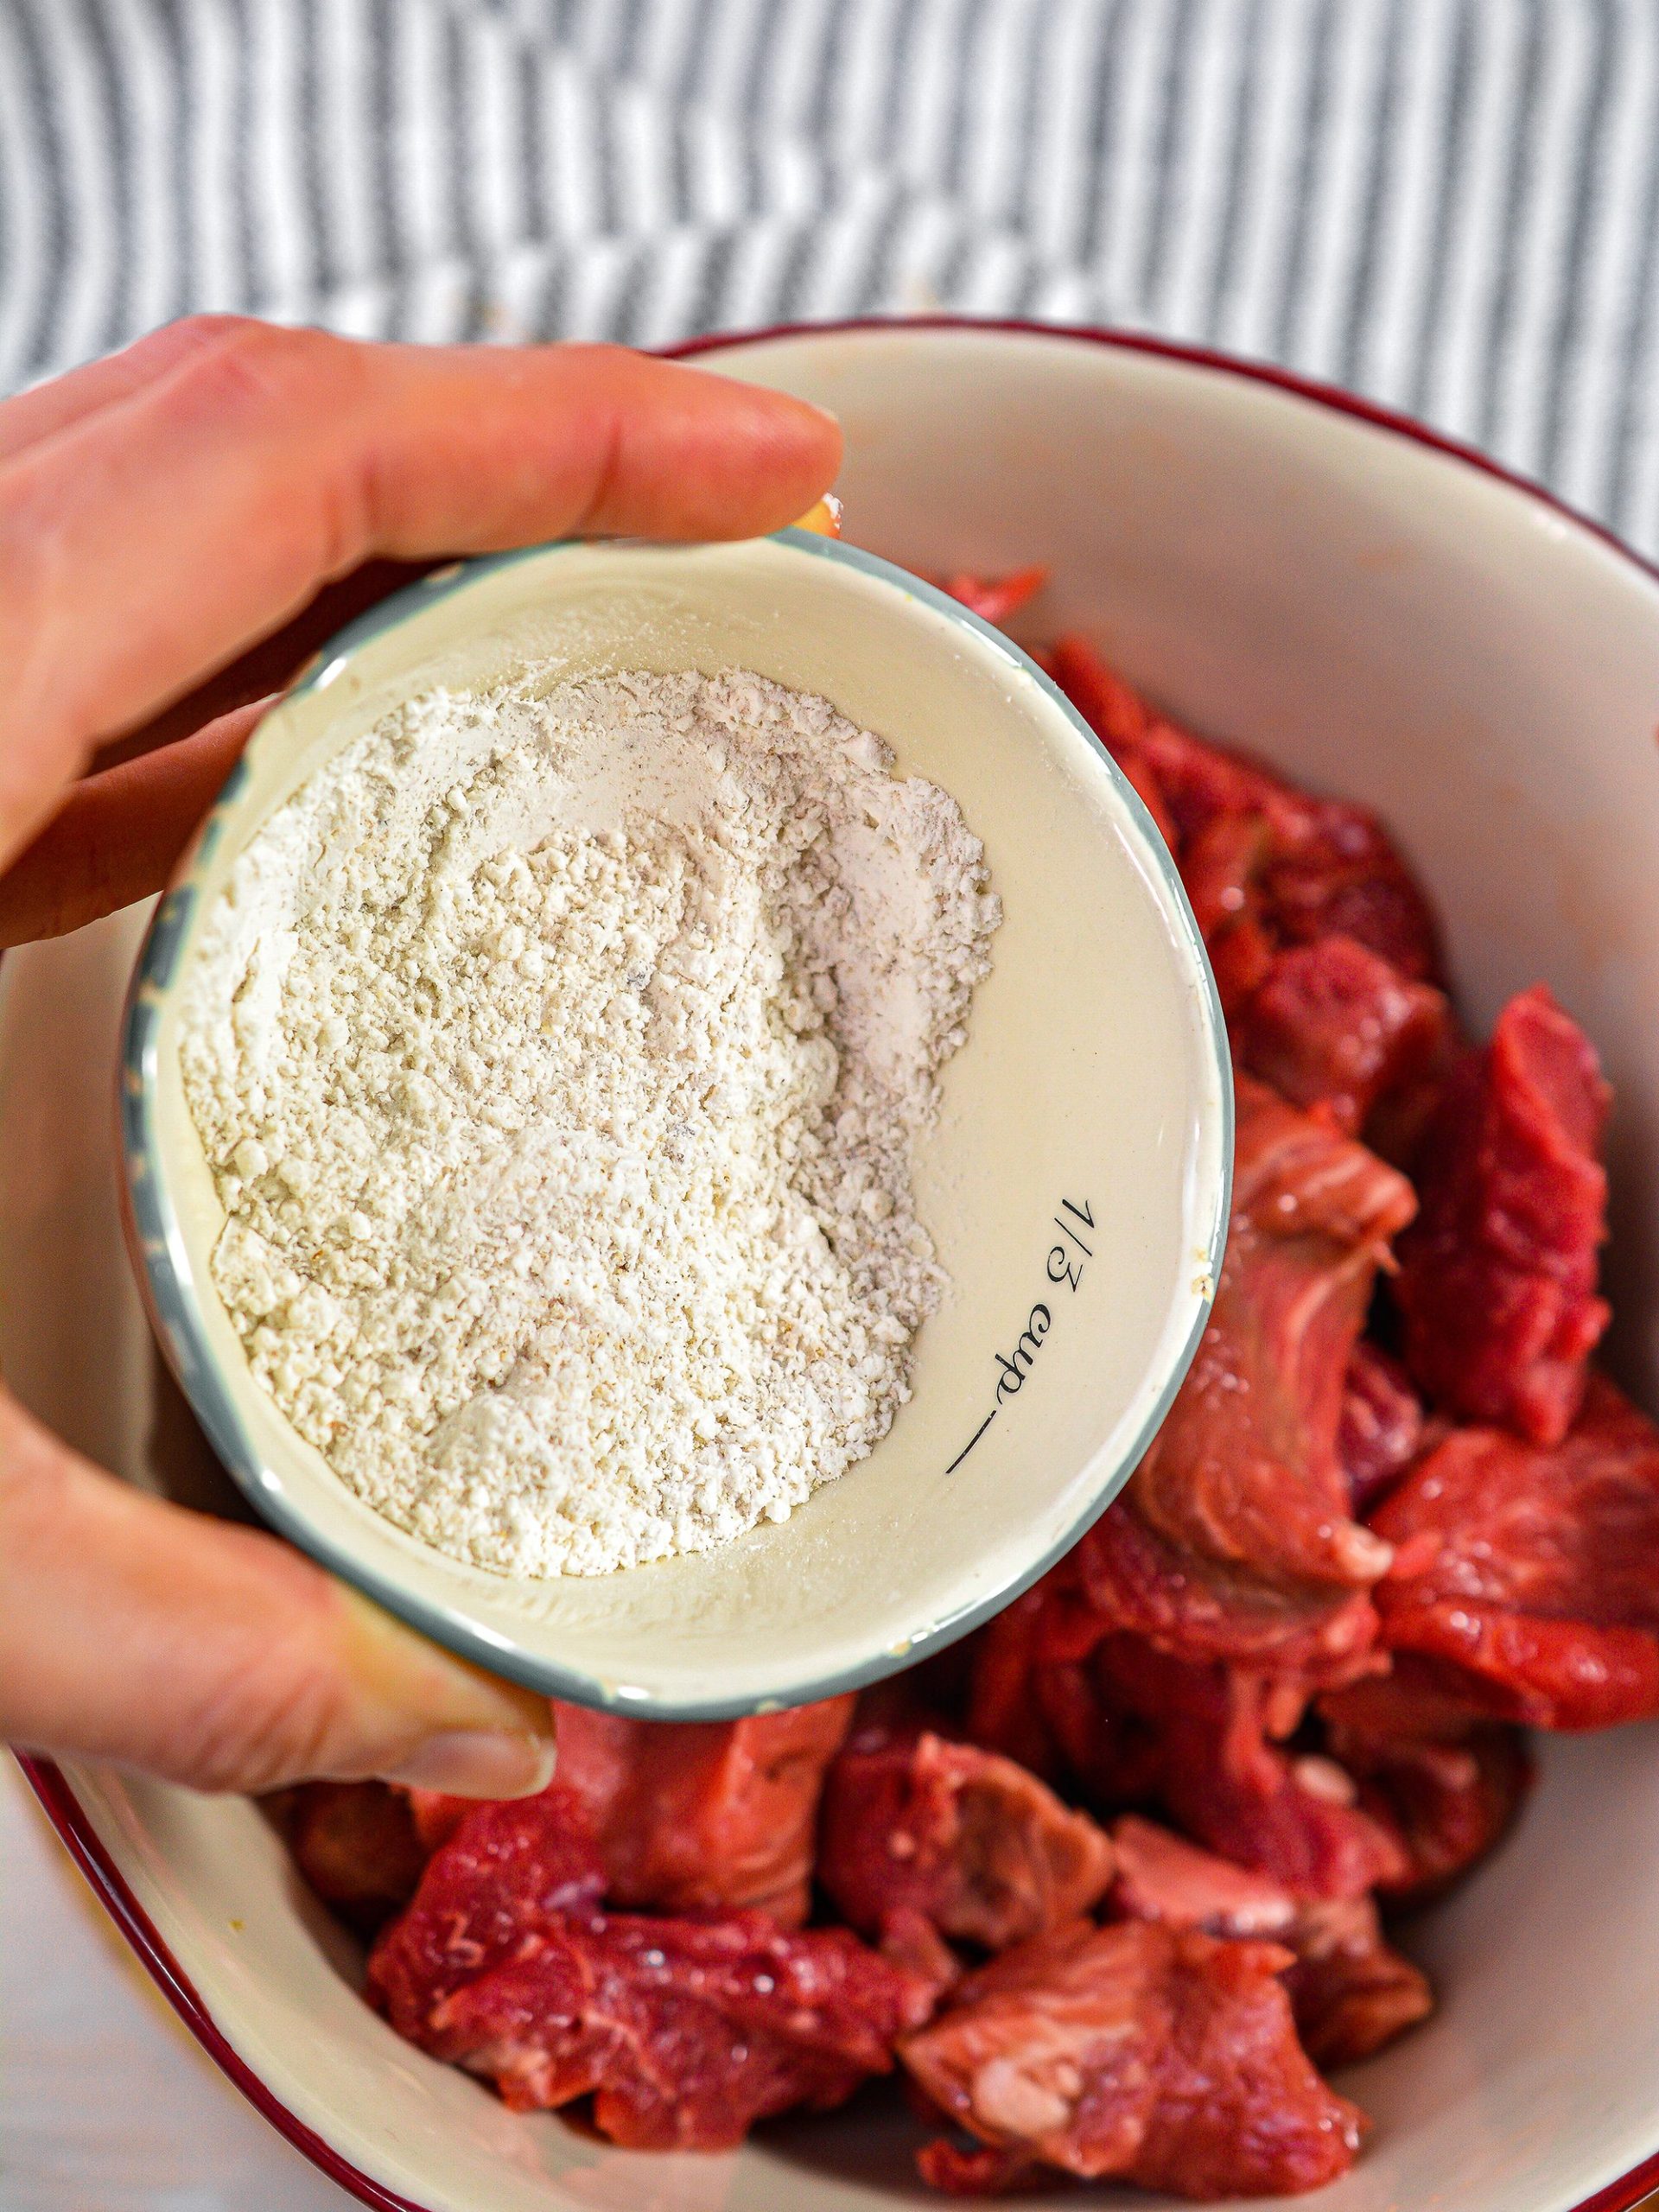 Sprinkle the seasoned flour over the meat and toss to coat well.